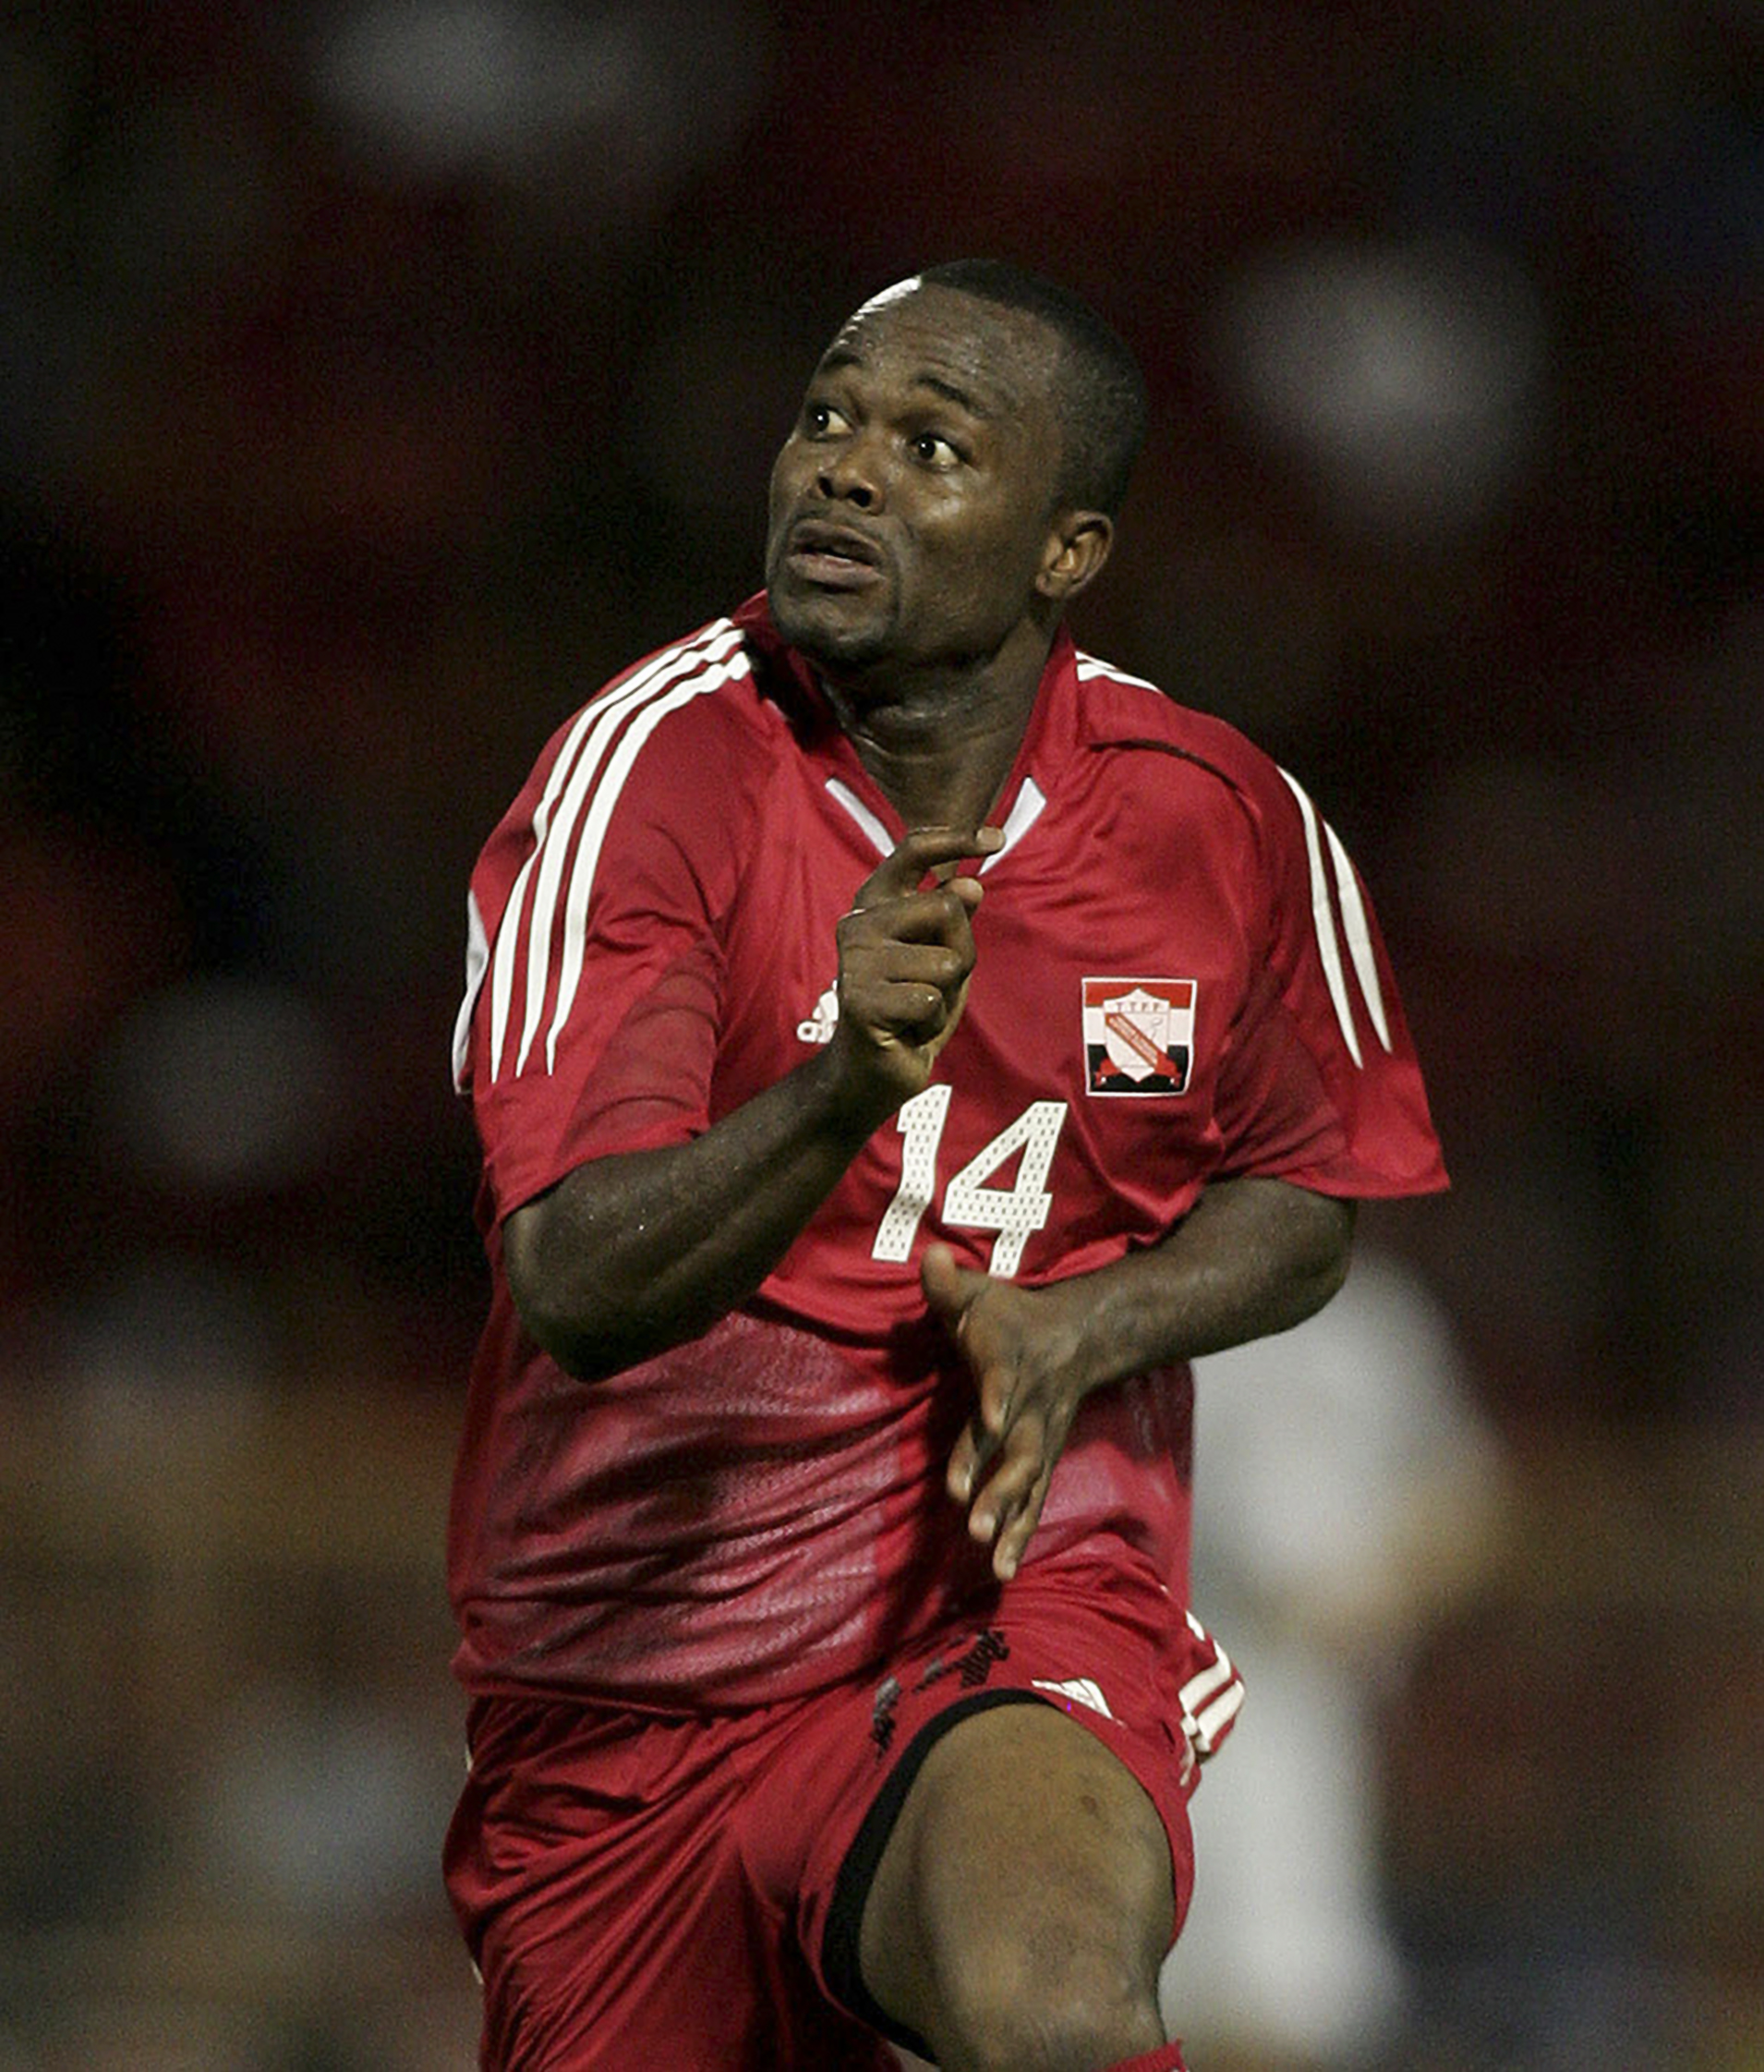 PORT OF SPAIN, TRINIDAD AND TOBAGO - NOVEMBER 12: Stern John of Trinidad during the FIFA World Cup Playoff, 1st Leg match between Trinidad and Tobago and Bahrain at The Hasely Crawford Stadium on November 12, 2005, in Port of Spain, Trinidad.  (Photo by B